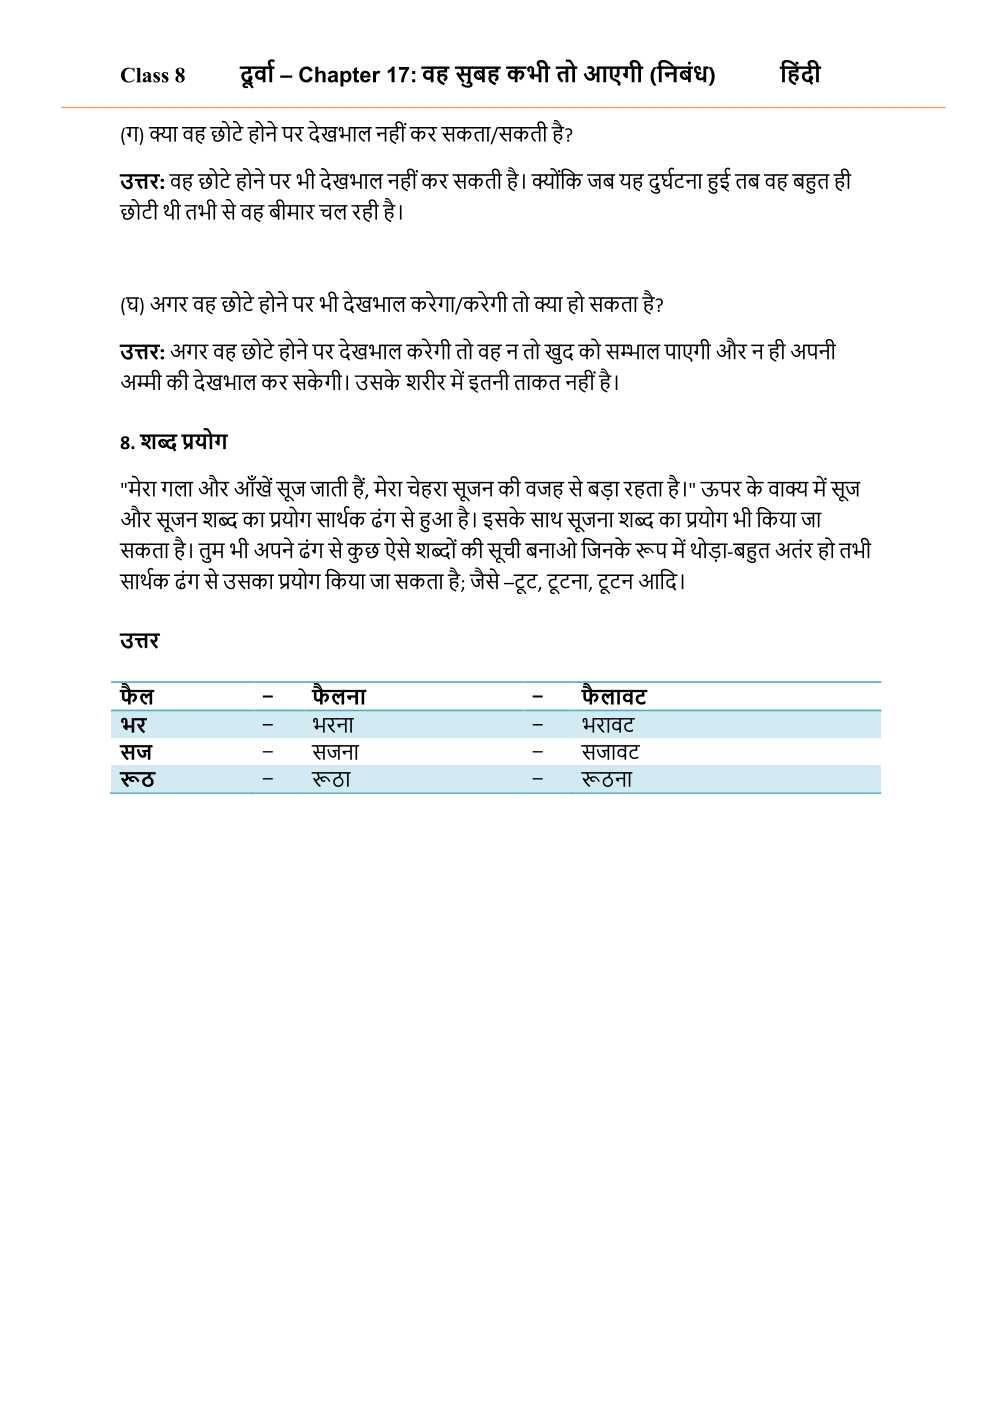 NCERT Solutions For Class 8 Hindi Durva Chapter 17